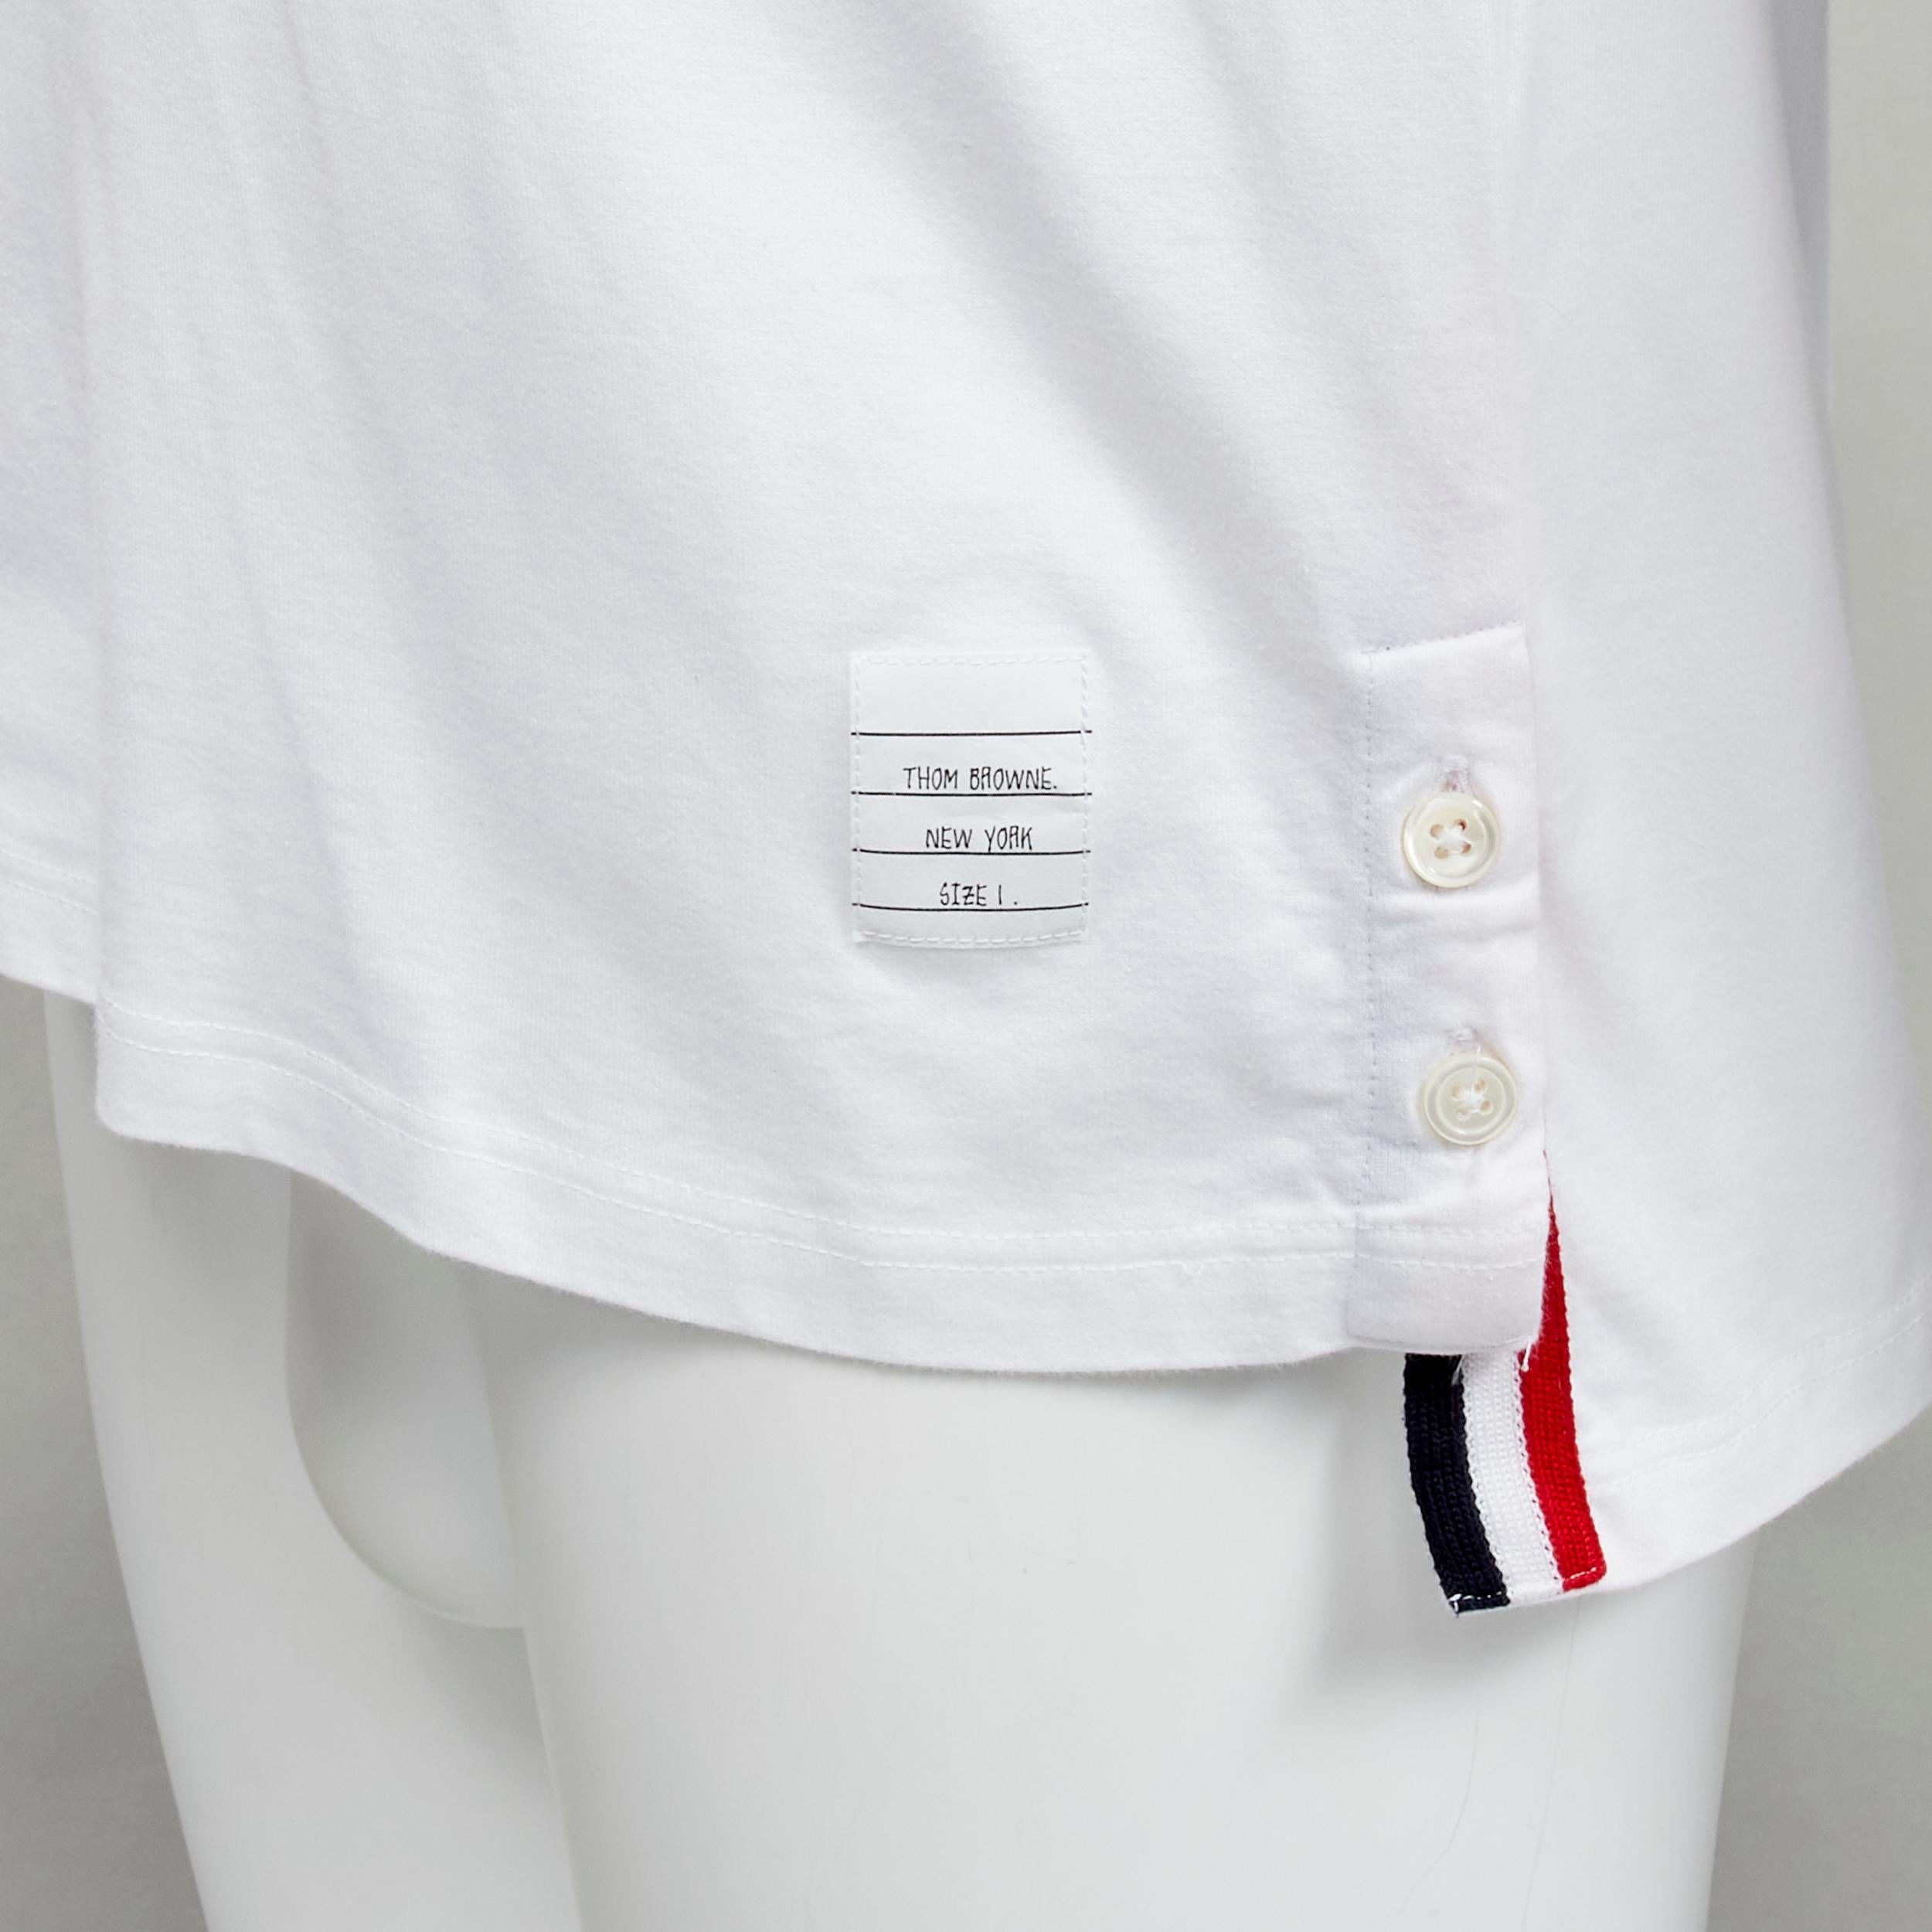 THOM BROWNE iconic stripes patch pocket white cotton tshirt Sz. 1 S
Reference: CRTI/A00756
Brand: Thom Browne
Designer: Thom Browne
Material: Cotton
Color: White
Pattern: Striped
Closure: Pullover
Extra Details: Thome Browne striped web side slit